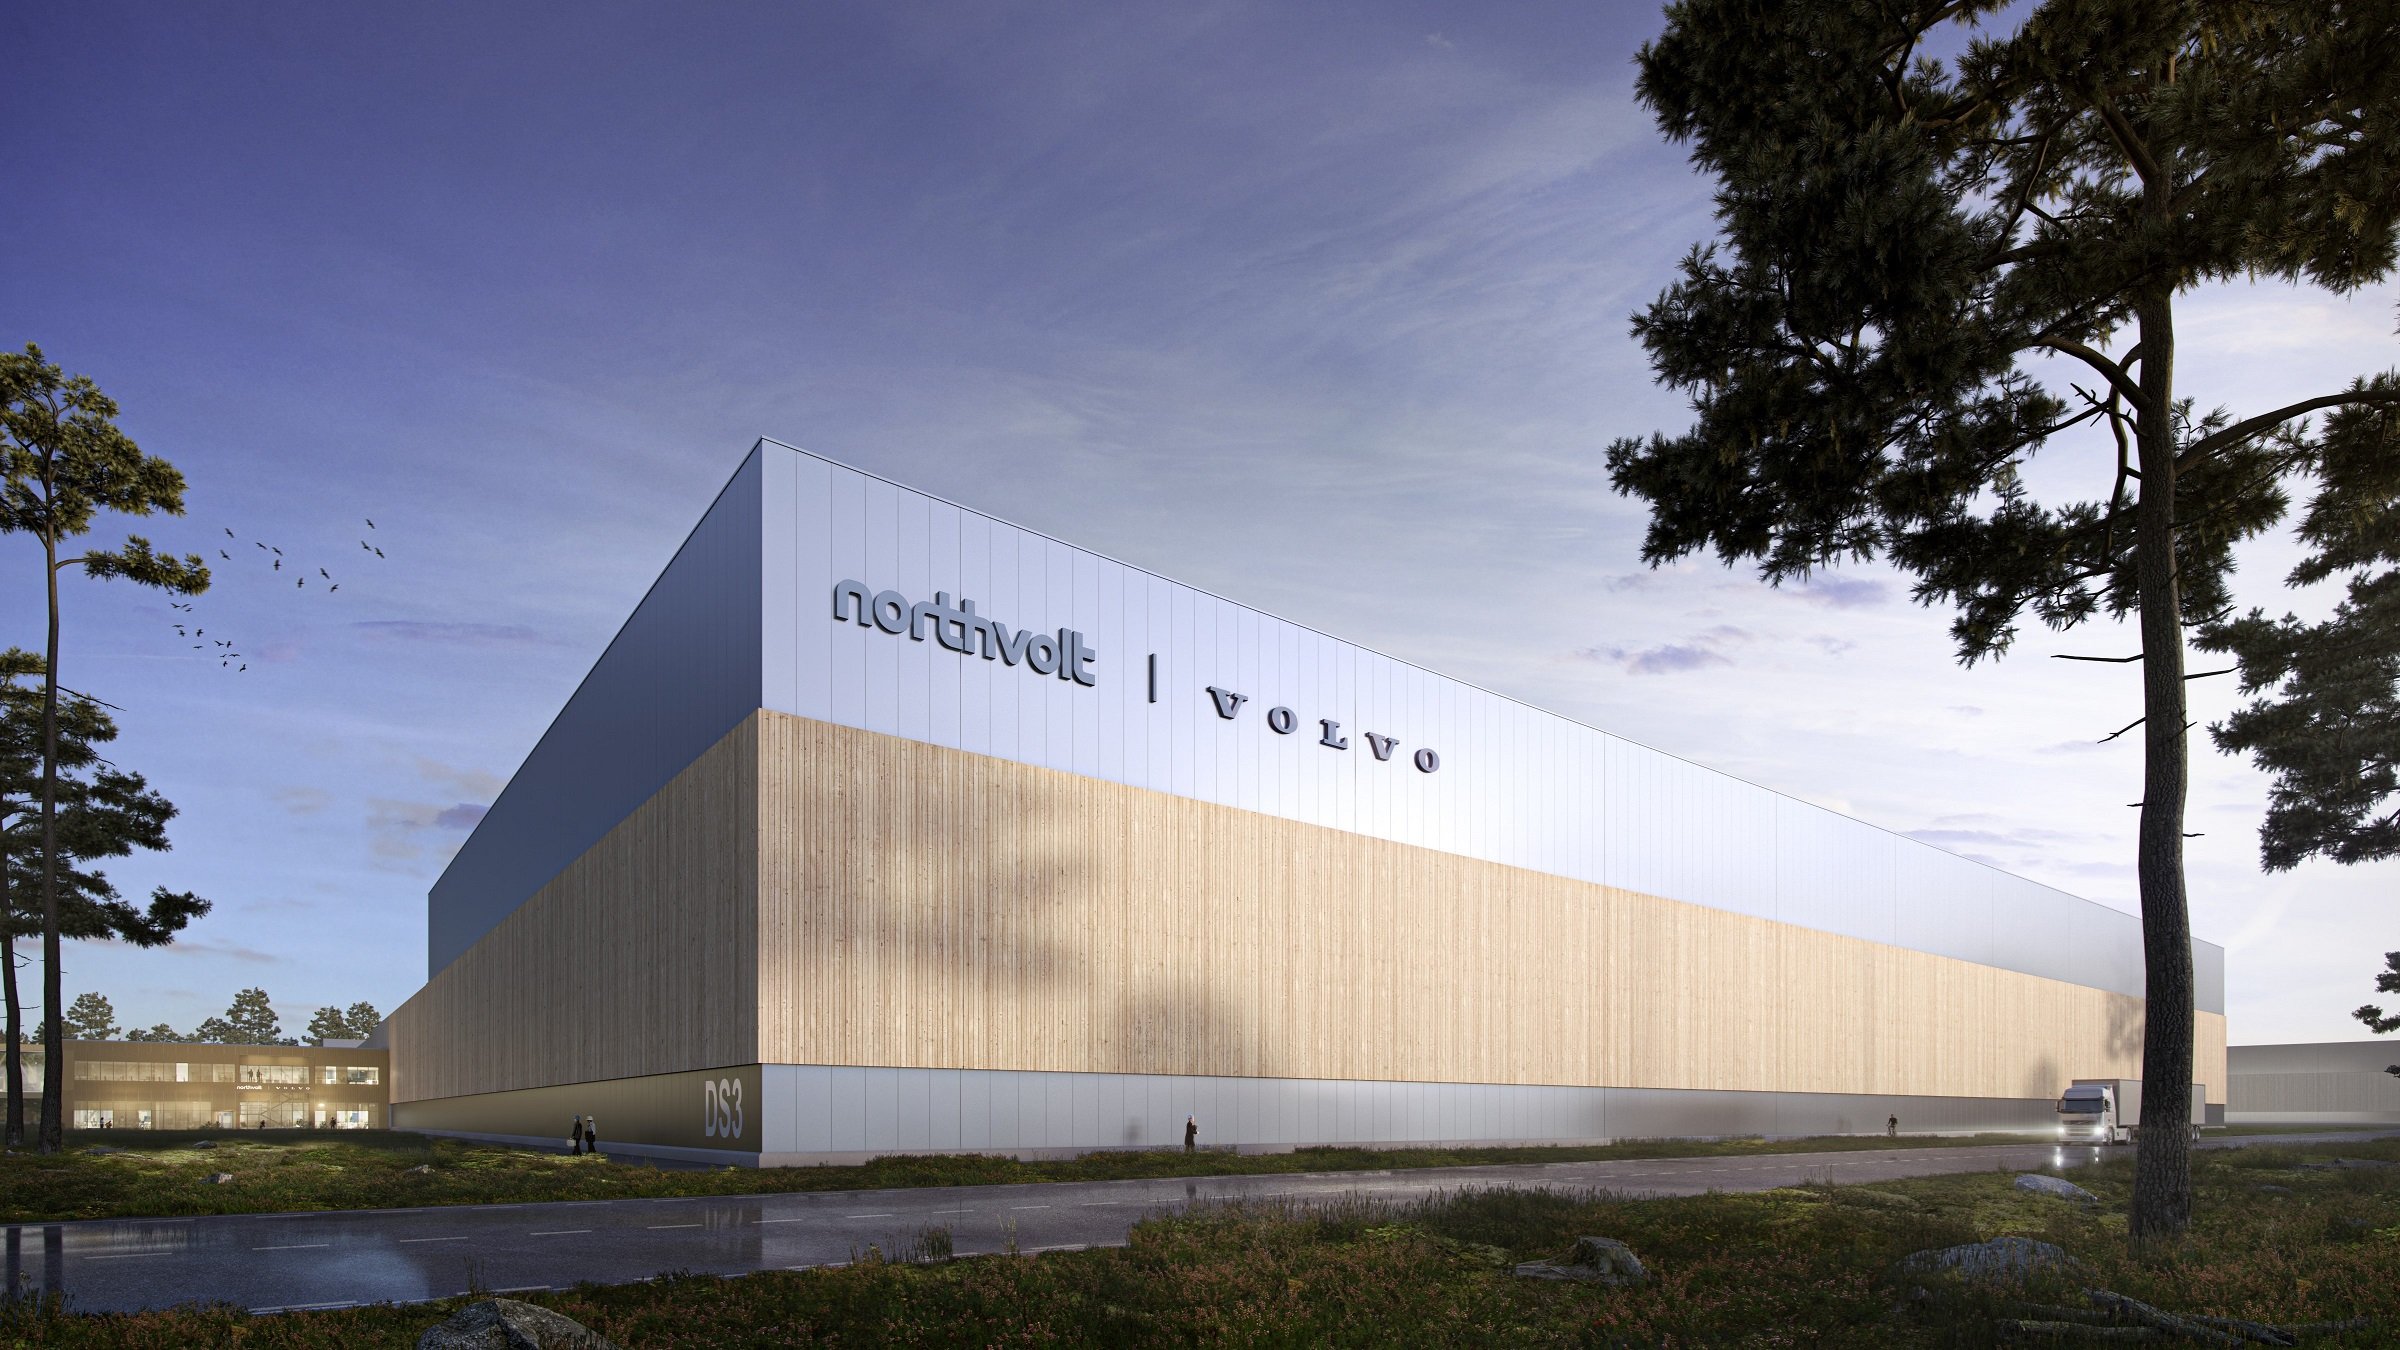 Volvo Cars and Northvolt accelerate to electrification with new battery plant in Gothenburg, Sweden